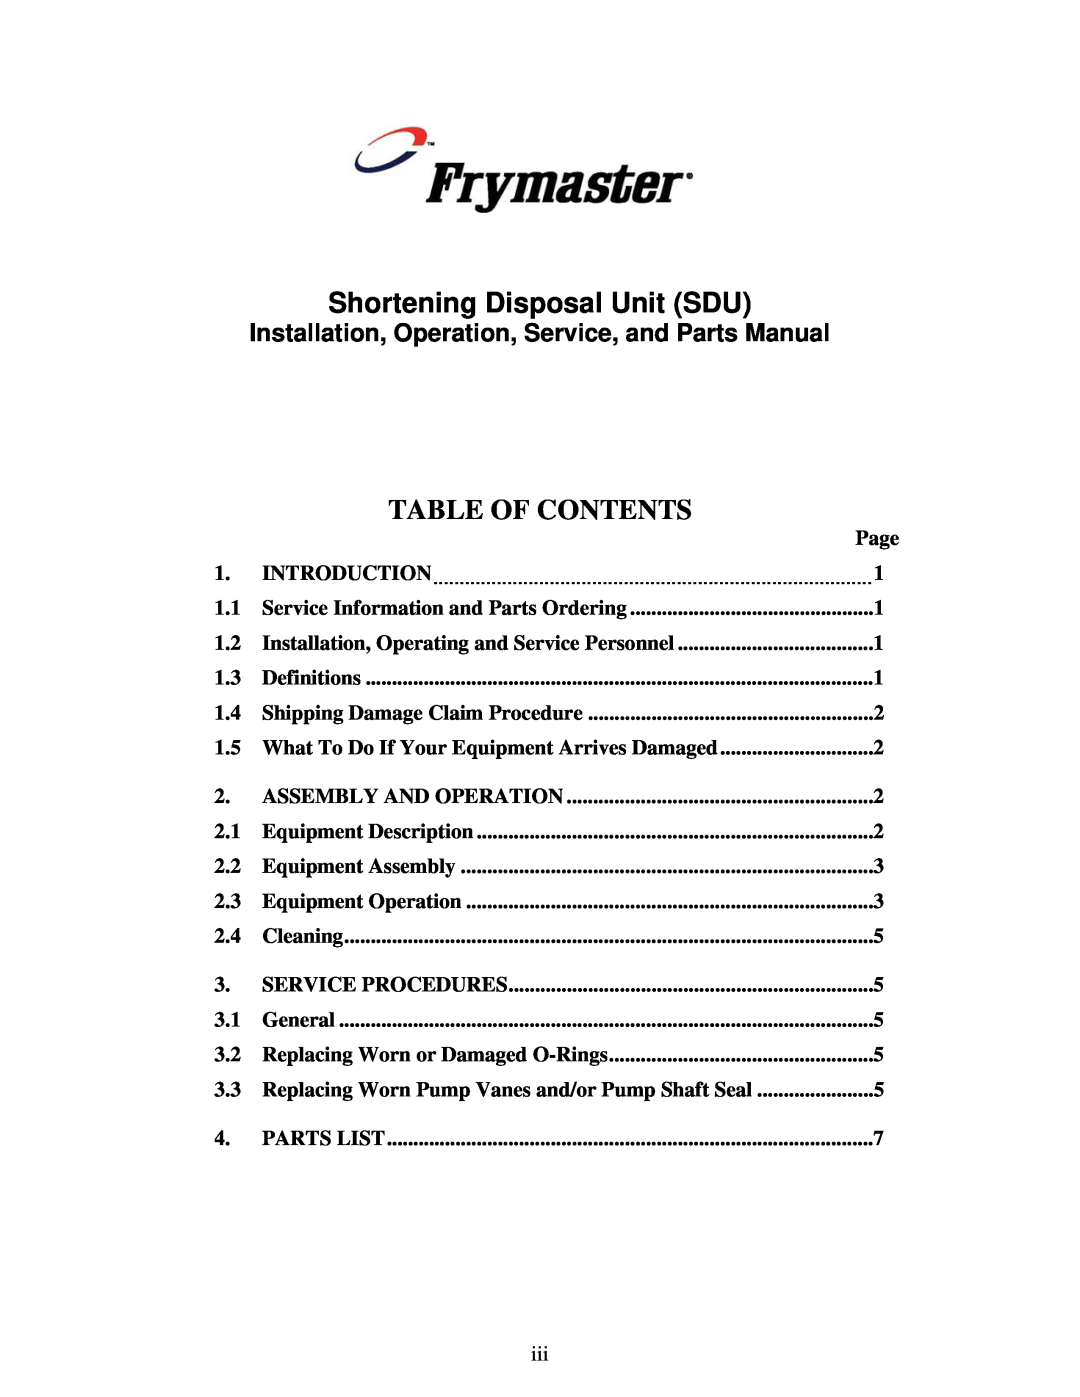 Frymaster SDU 50 manual Shortening Disposal Unit SDU, Installation, Operation, Service, and Parts Manual, Table Of Contents 